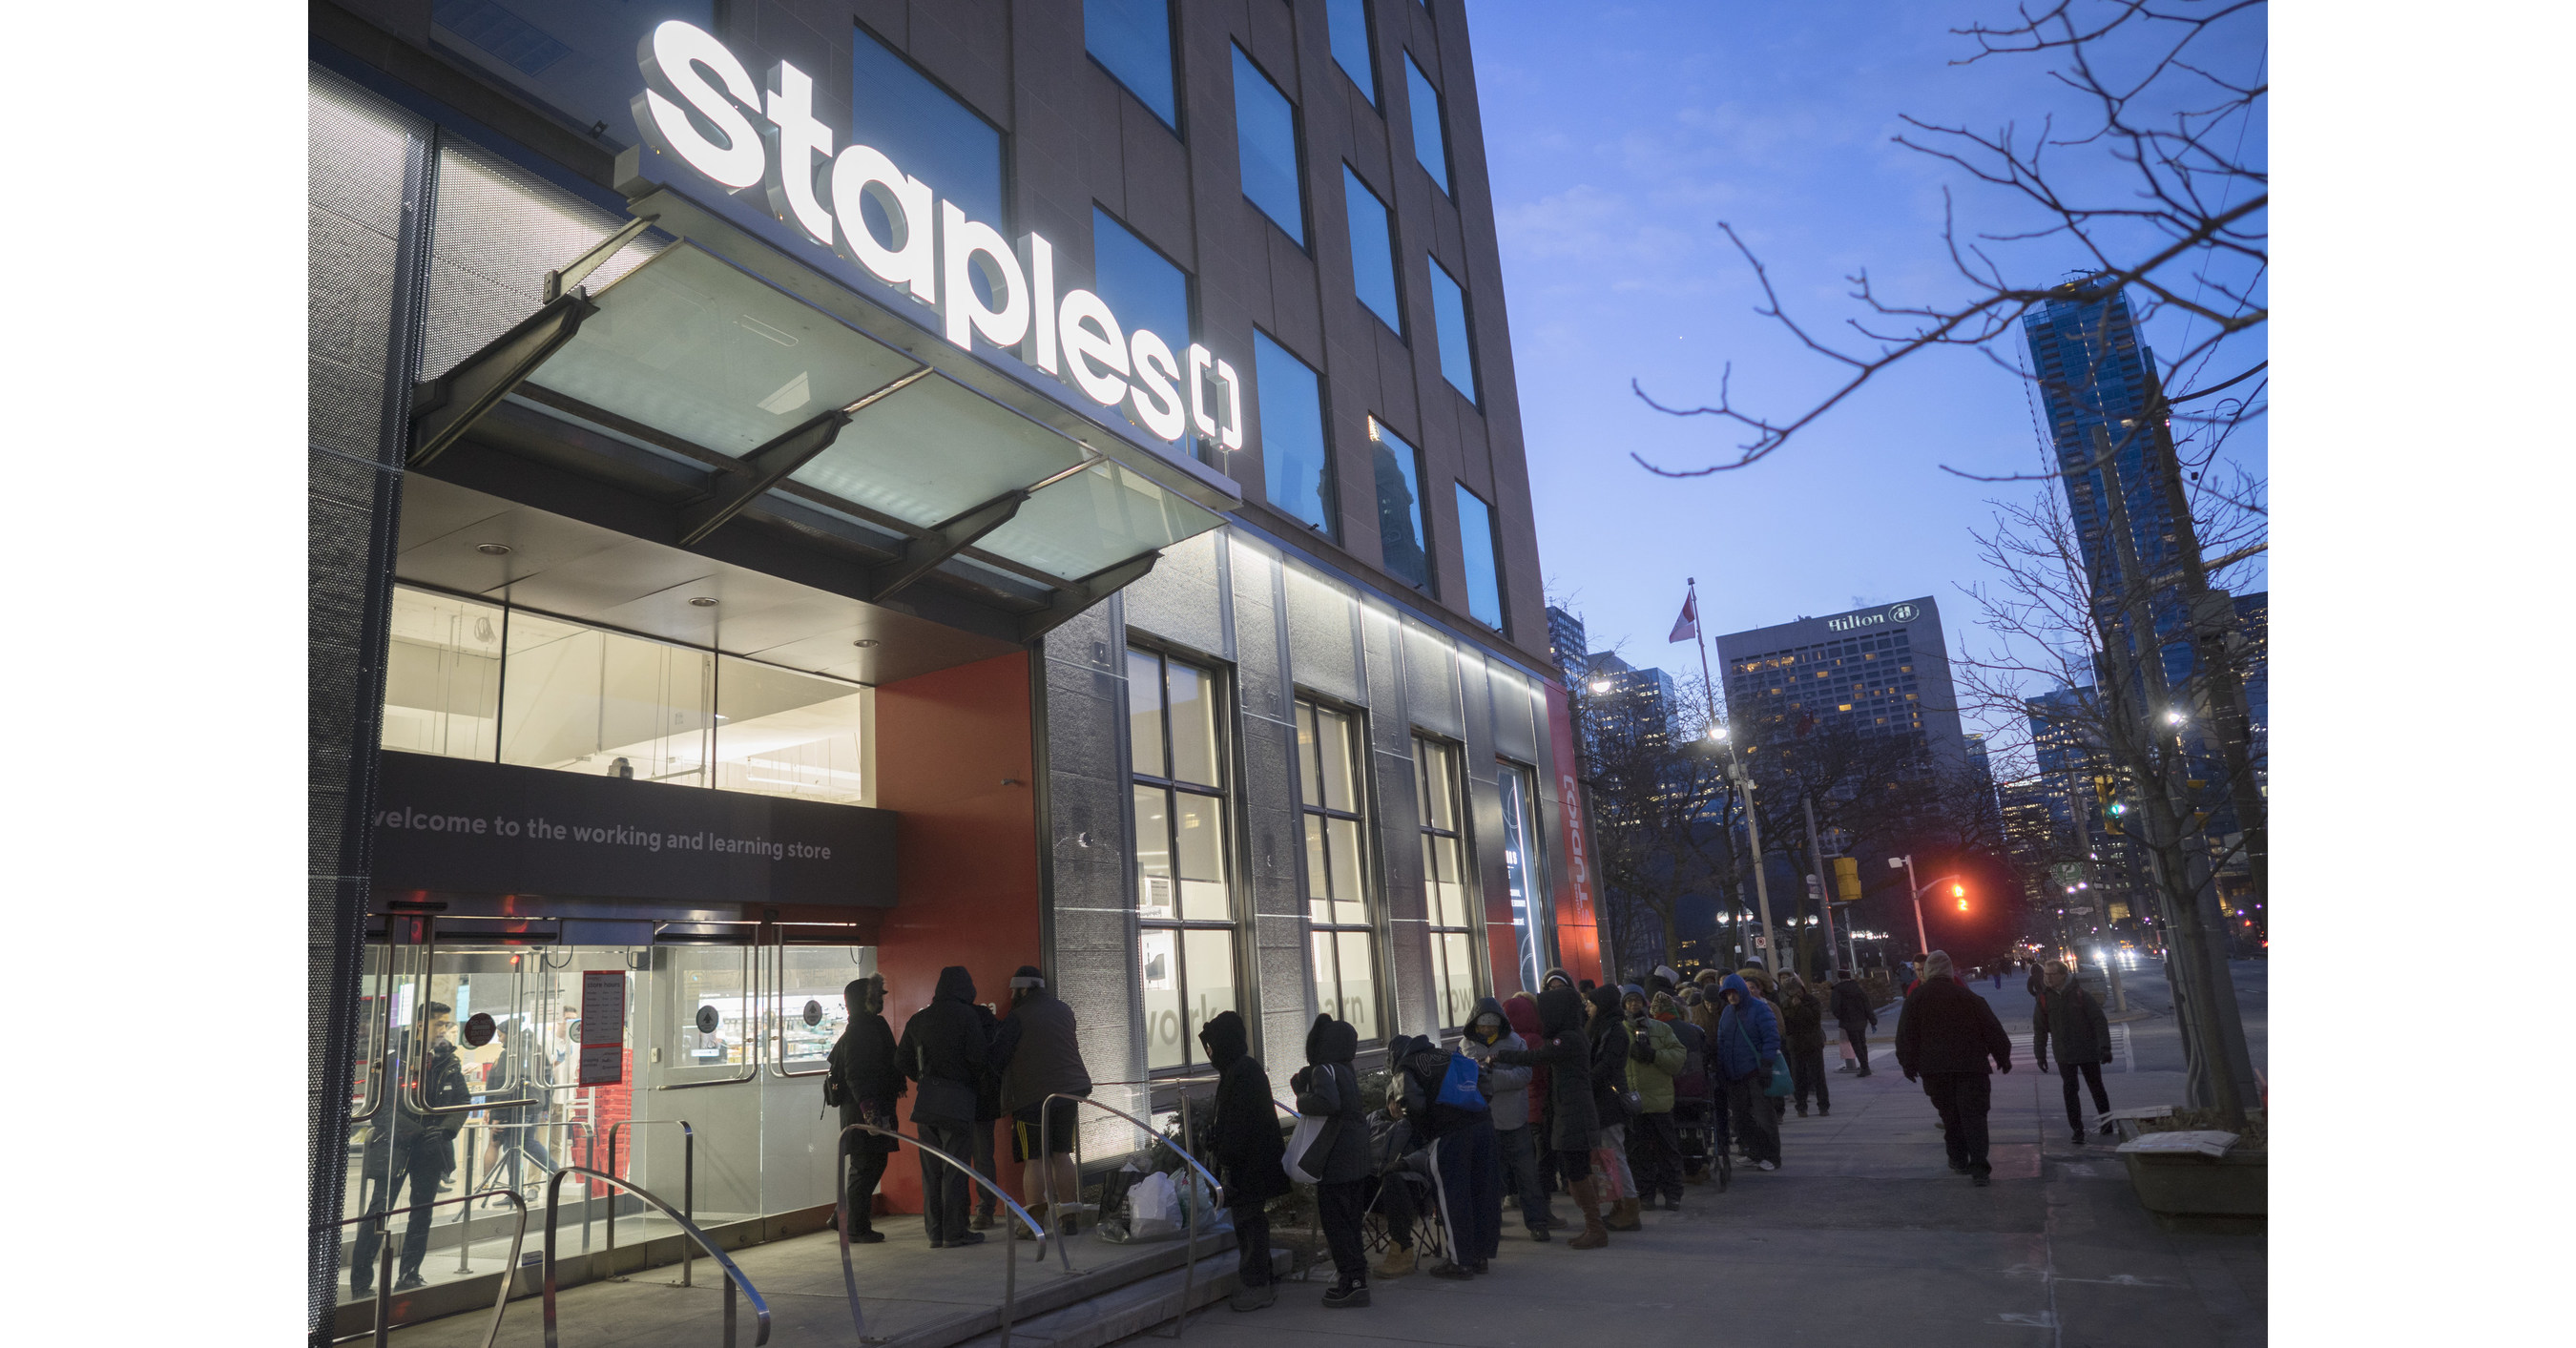 Staples Canada jumps on the co-working trend, heralding a new era of shared  workspaces